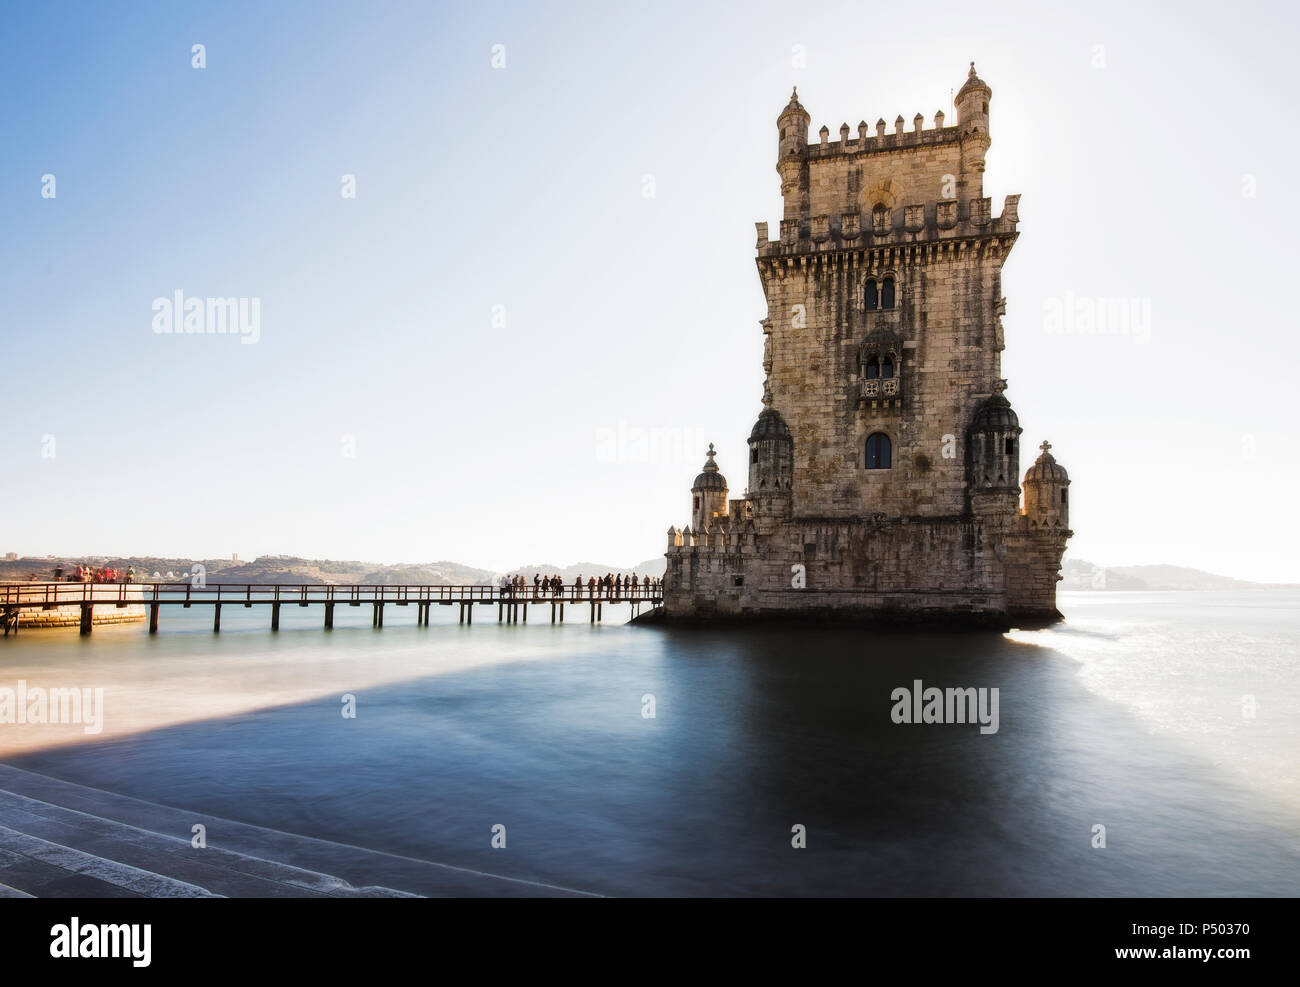 Portugal, Lisbon, View of Belem tower Stock Photo